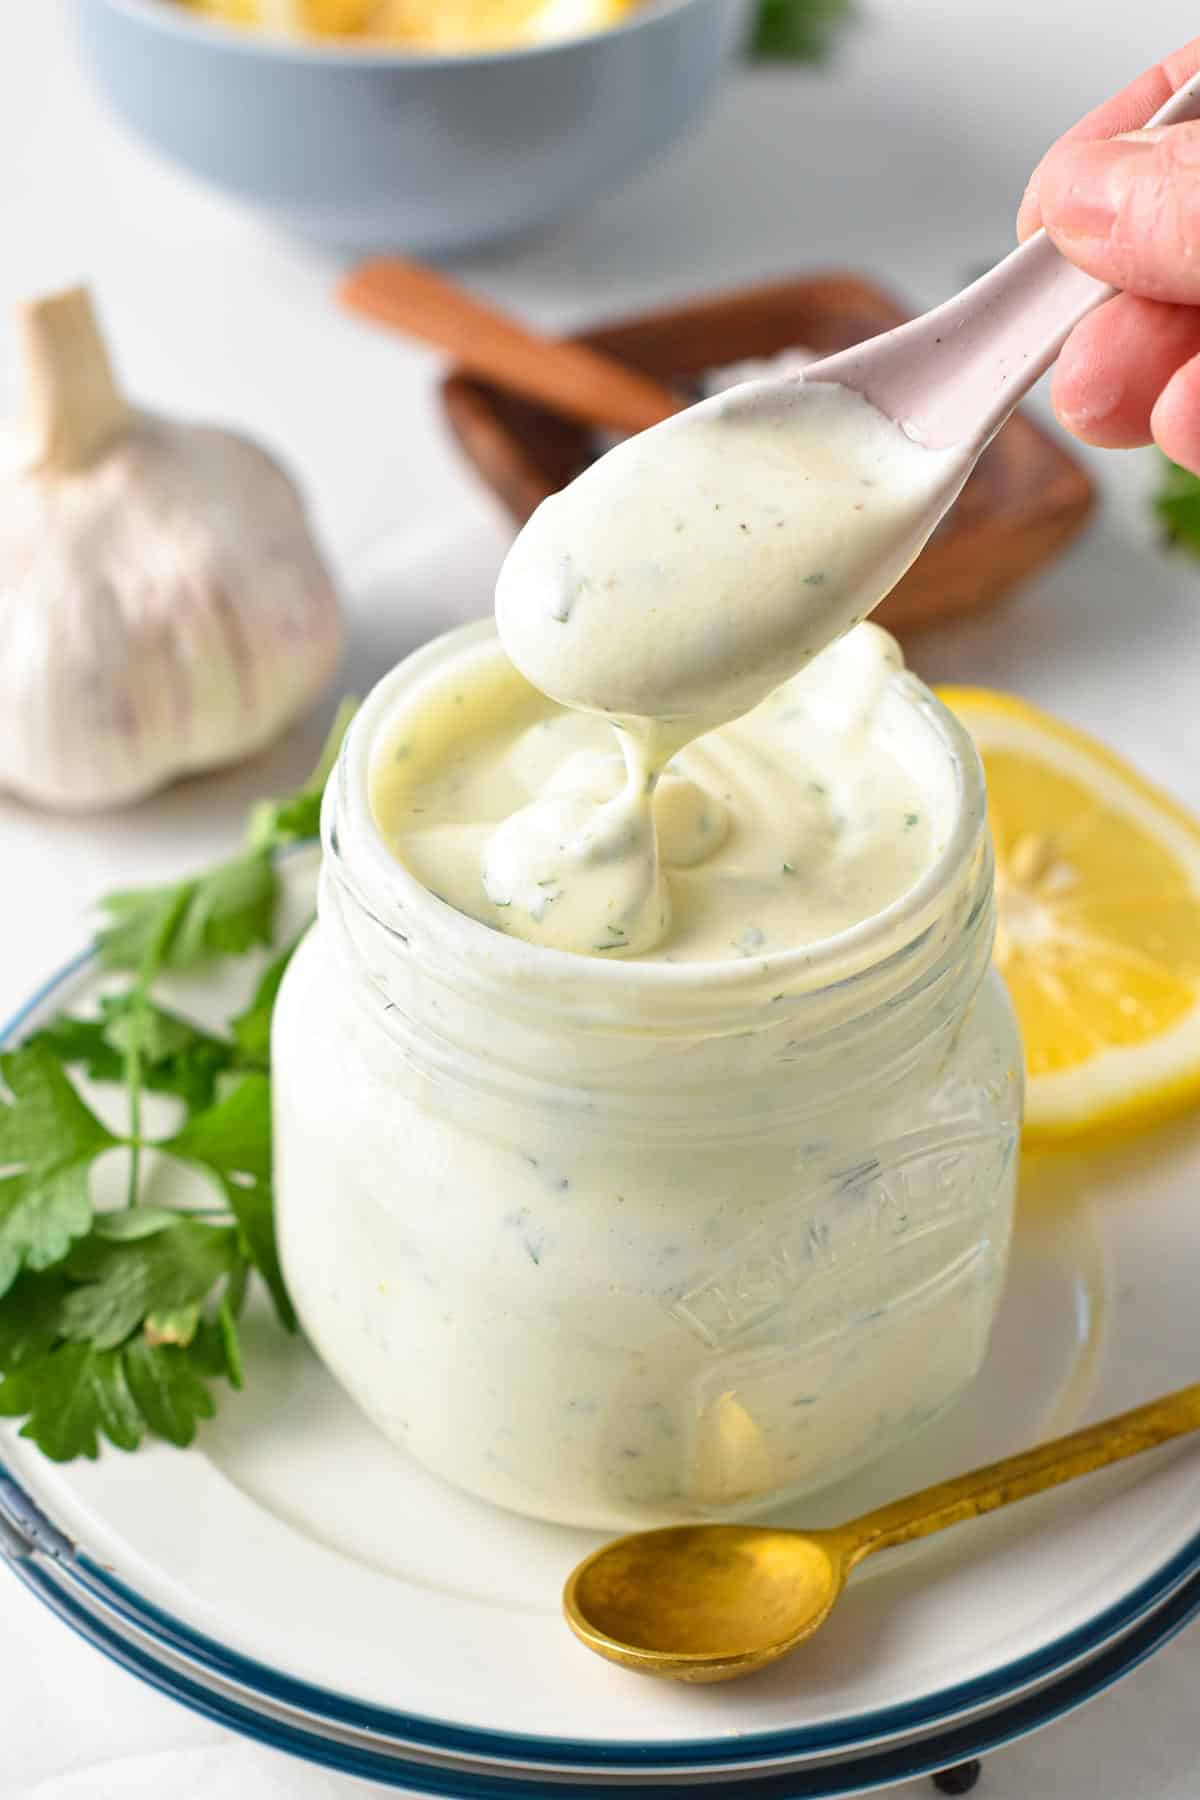 This Greek Yogurt Dressing is a creamy, high-protein salad dressing perfect to add creaminess and rich texture to any lettuce or salad. It's a healthier salad dressing too, with less calories, fat and packed with calcium and filling proteins.